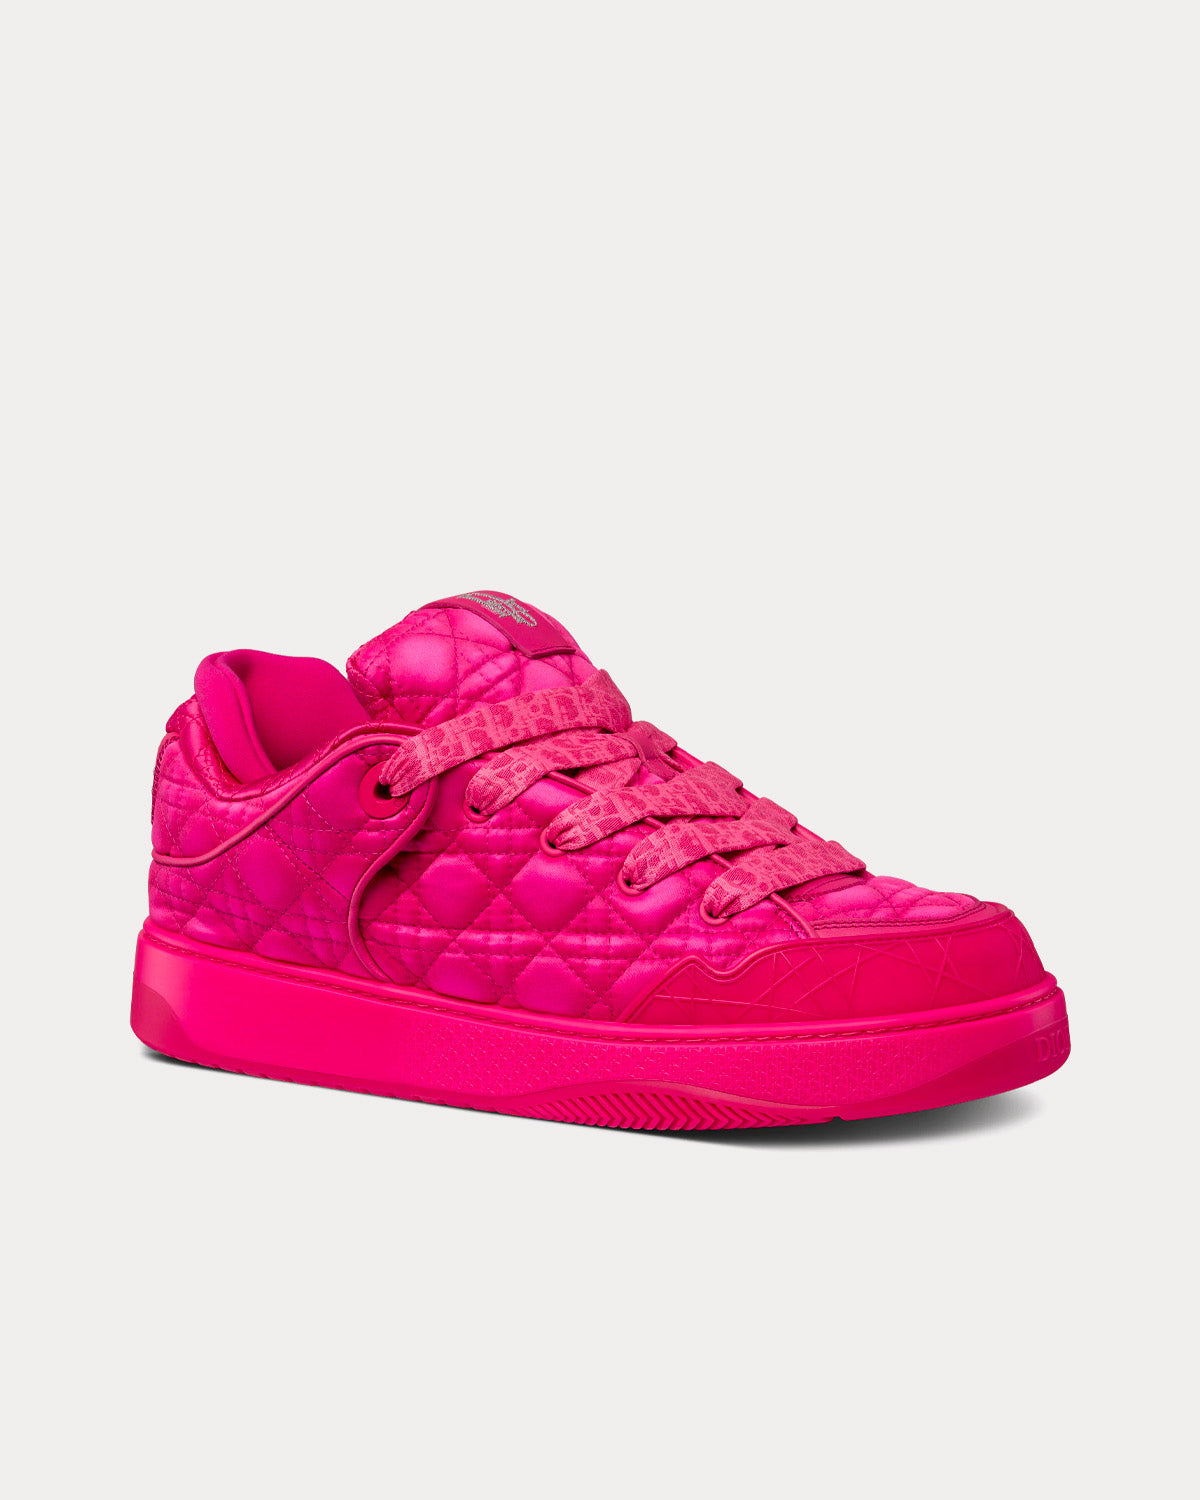 Dior x ERL - B9S Skater Limited And Numbered Edition Fuchsia Kumo Cannage Satin Low Top Sneakers